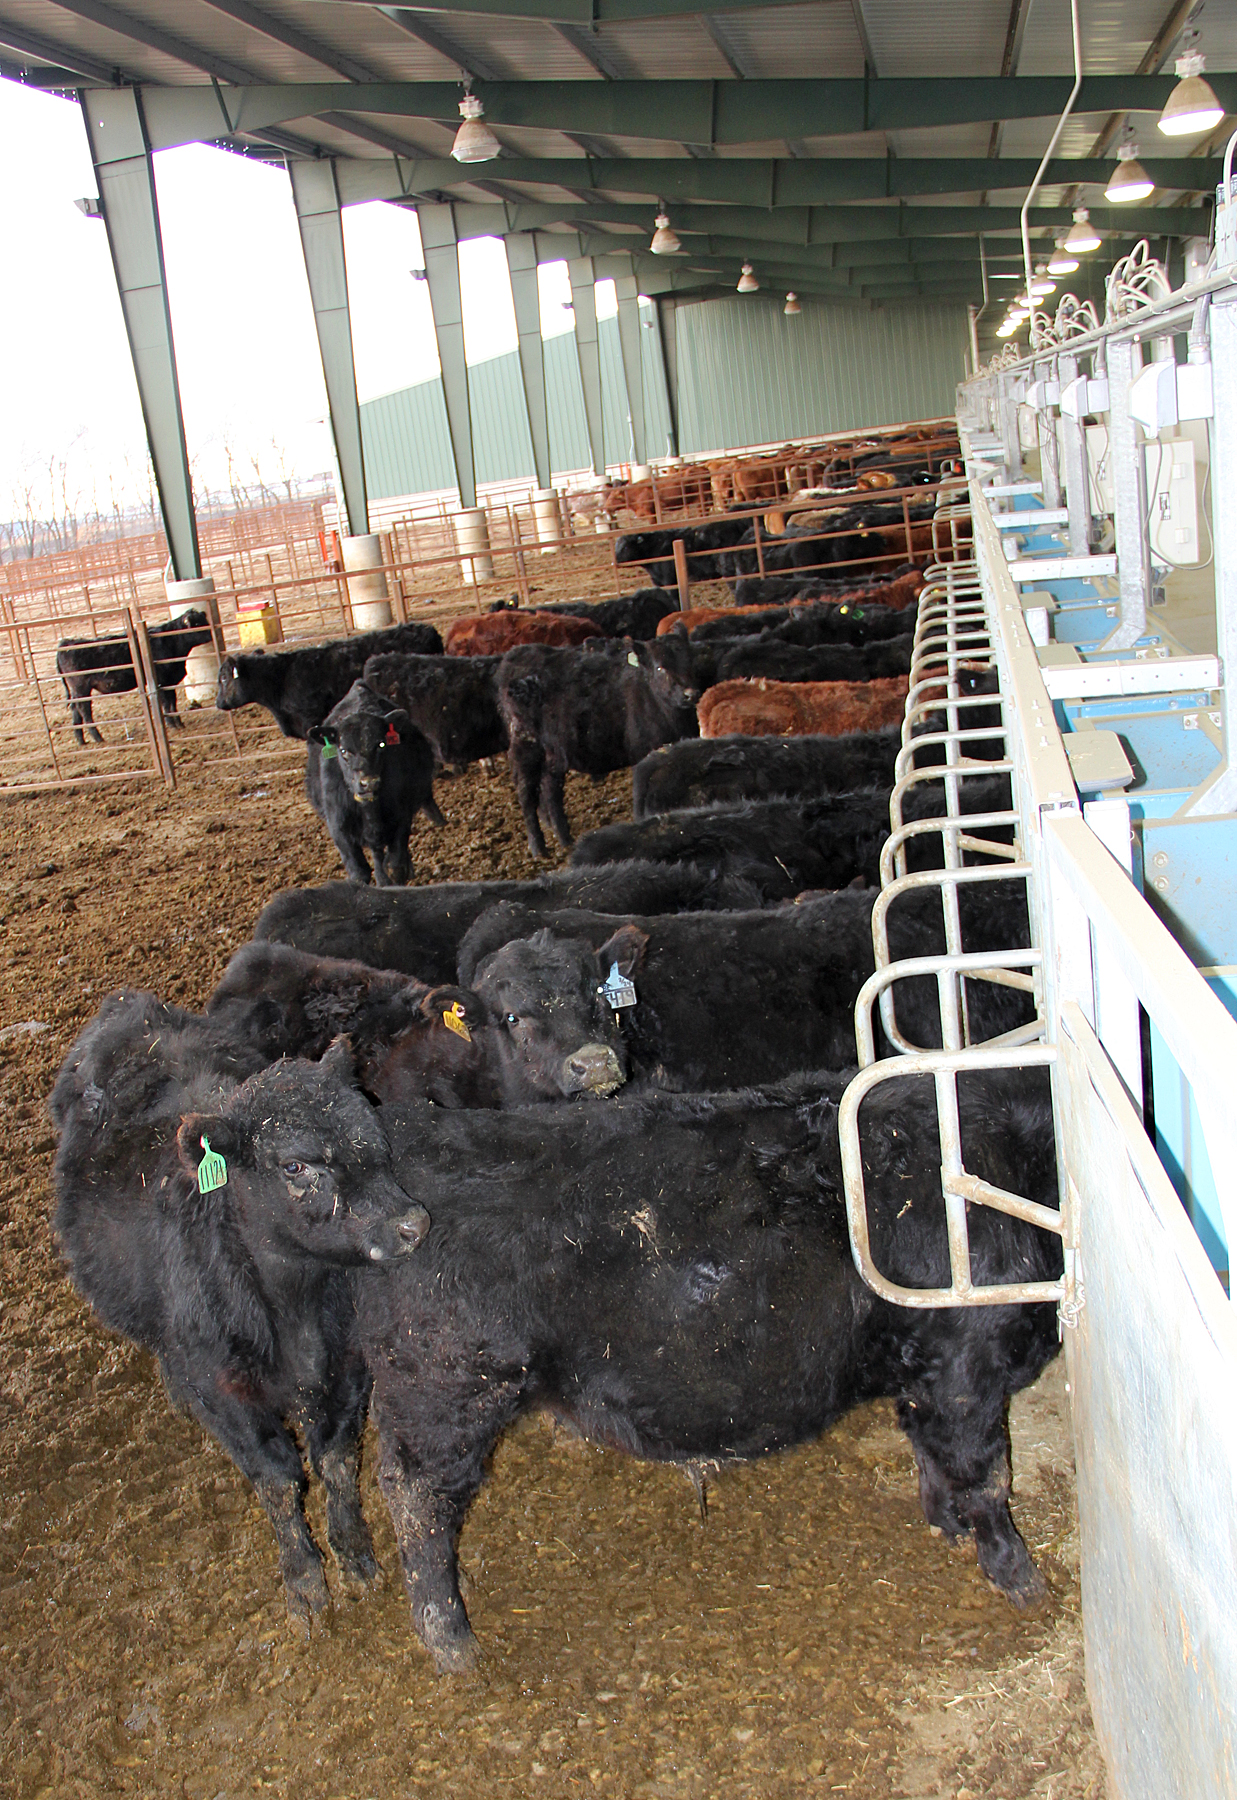 The state-of-the-art feeding system at NDSU's Beef Cattle Research Complex allows researchers to feed different diets to cattle in the same pen at different times of the day and monitor each animal's intake. (NDSU photo)